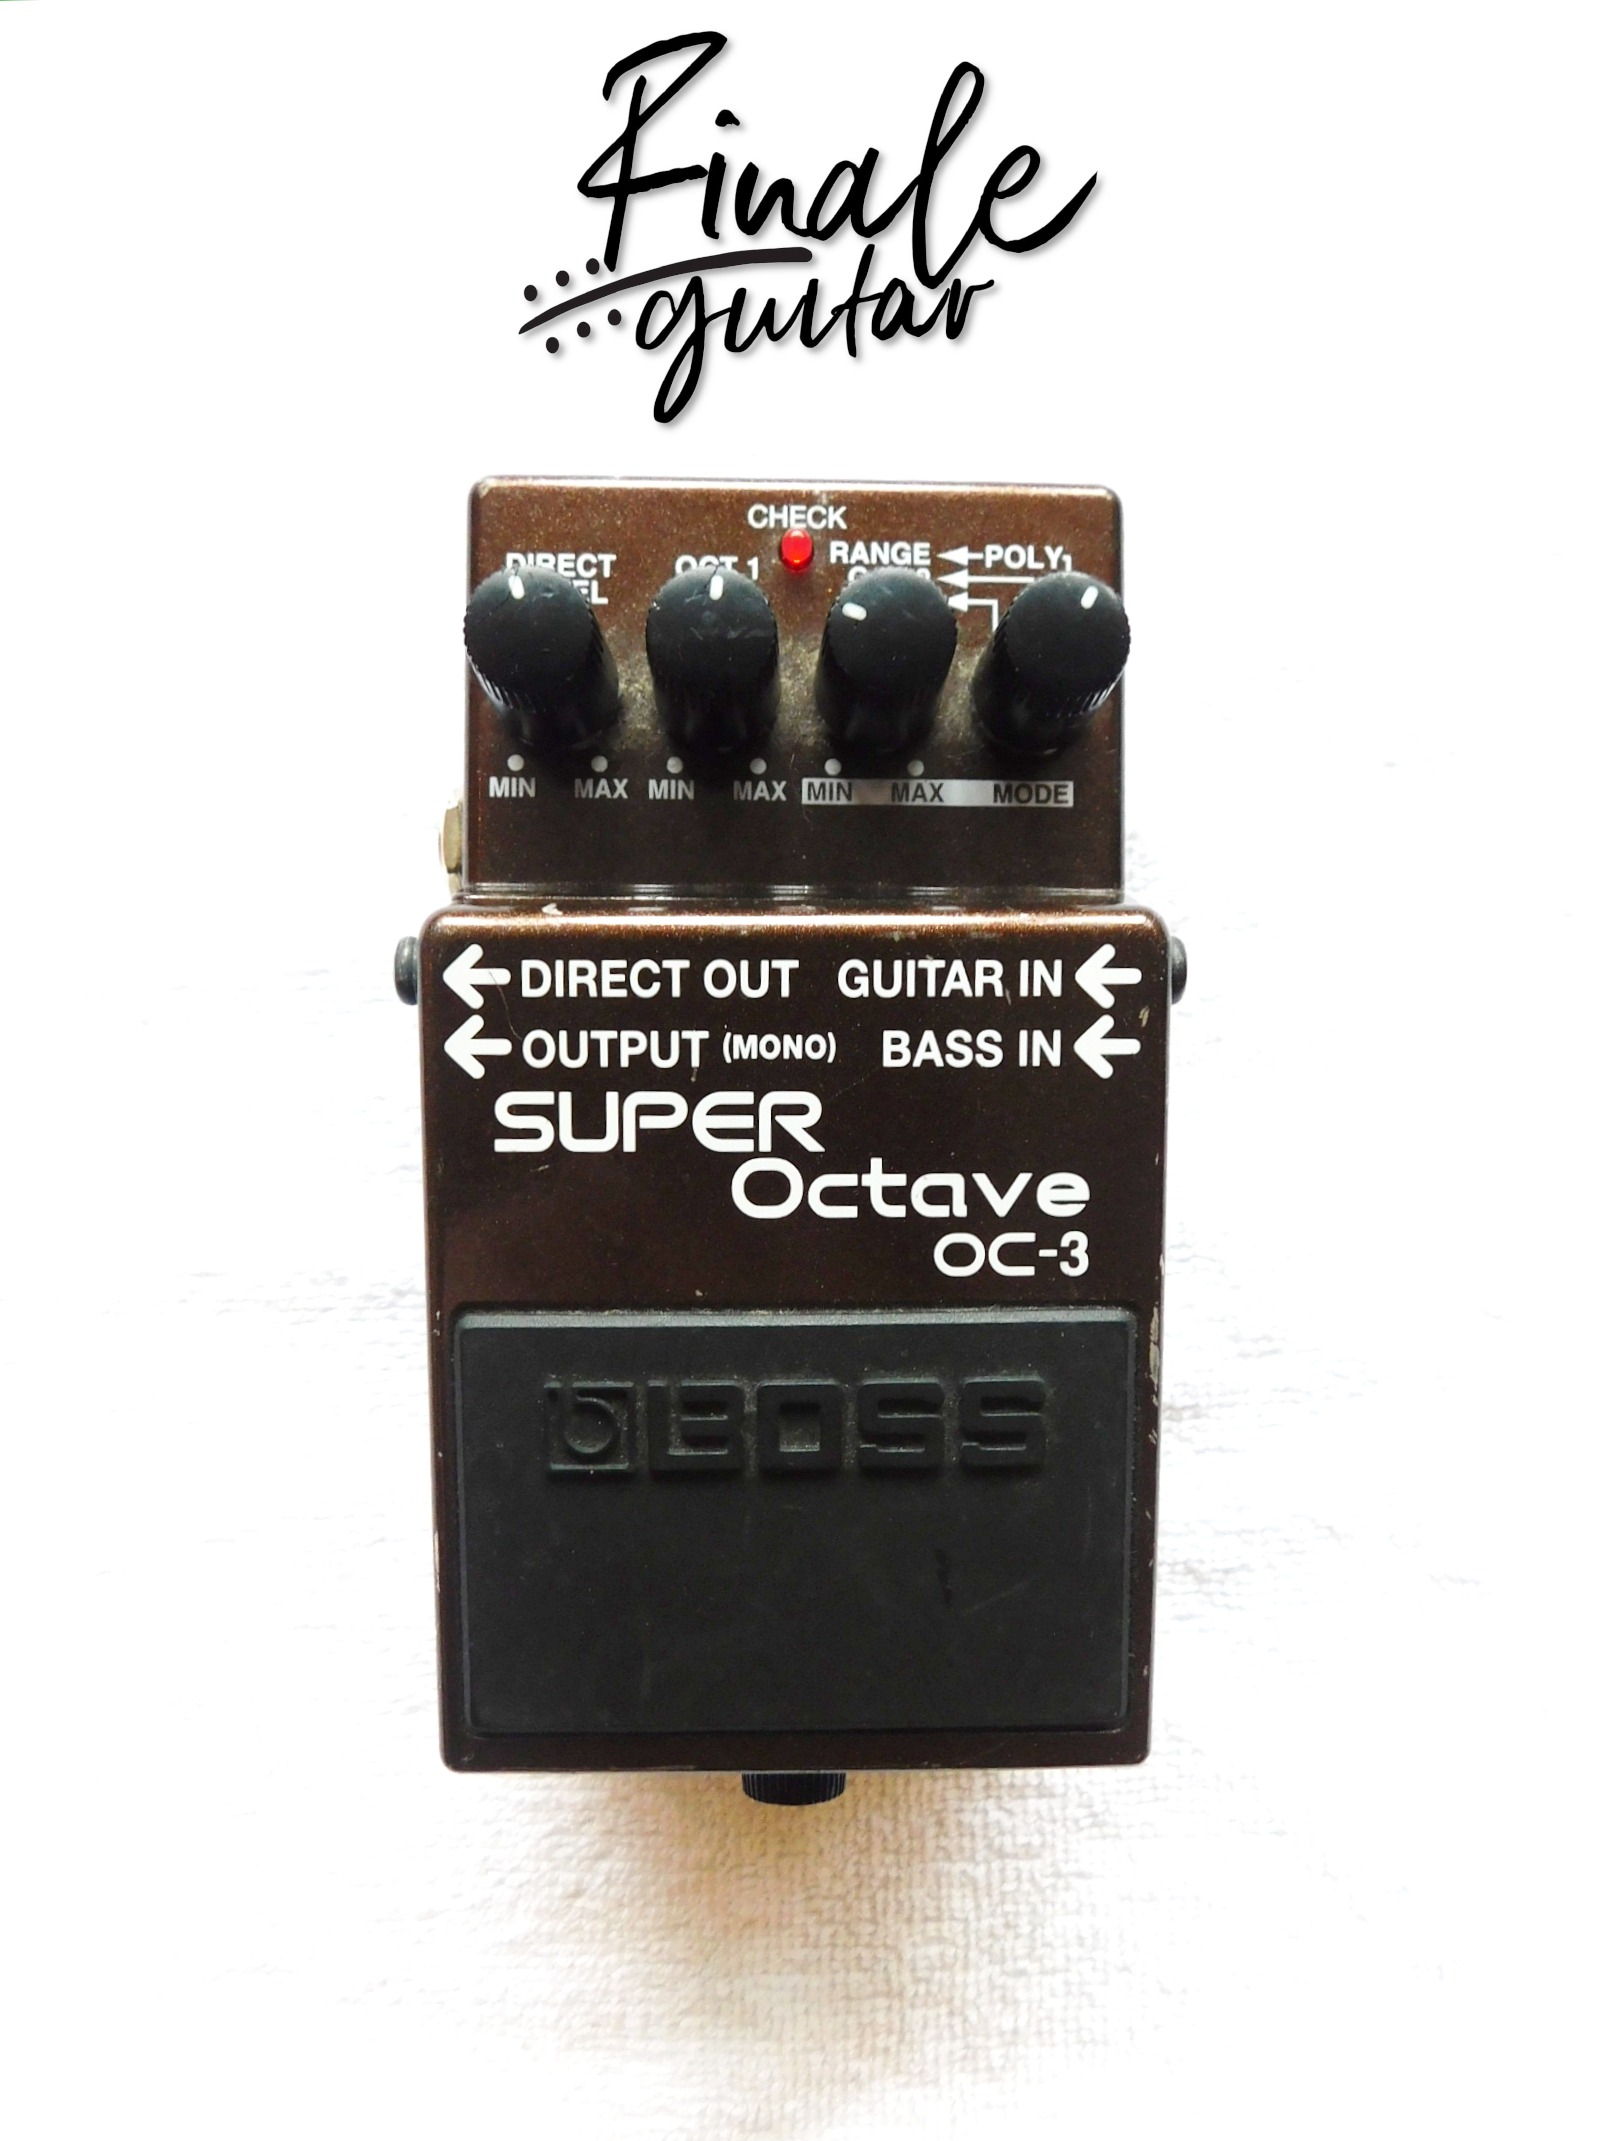 Boss Super Octave OC-3 for sale in our Sheffield guitar shop Finale Guitar